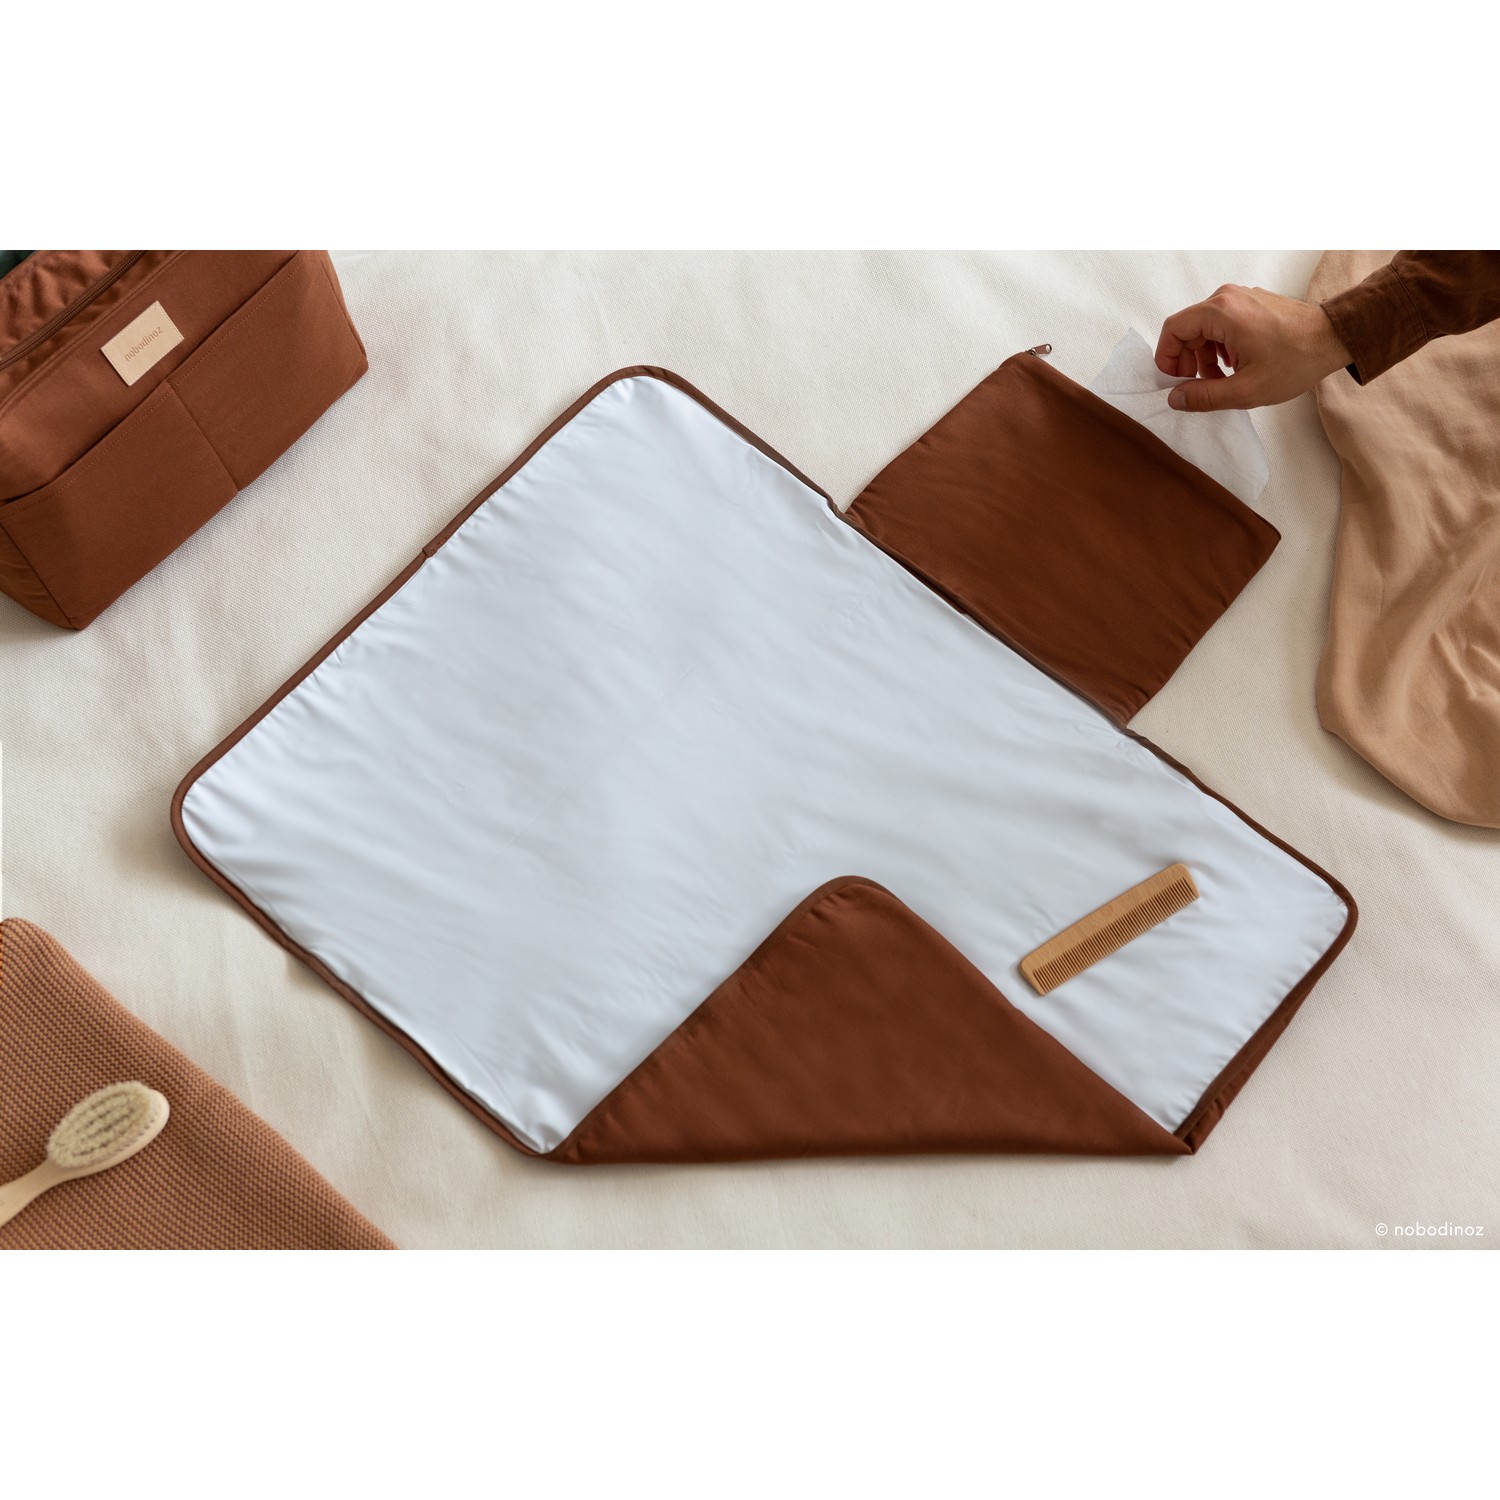 matelas-a-langer-baby-on-the-go-clay-brown-nobodinoz.2qrjn2.max